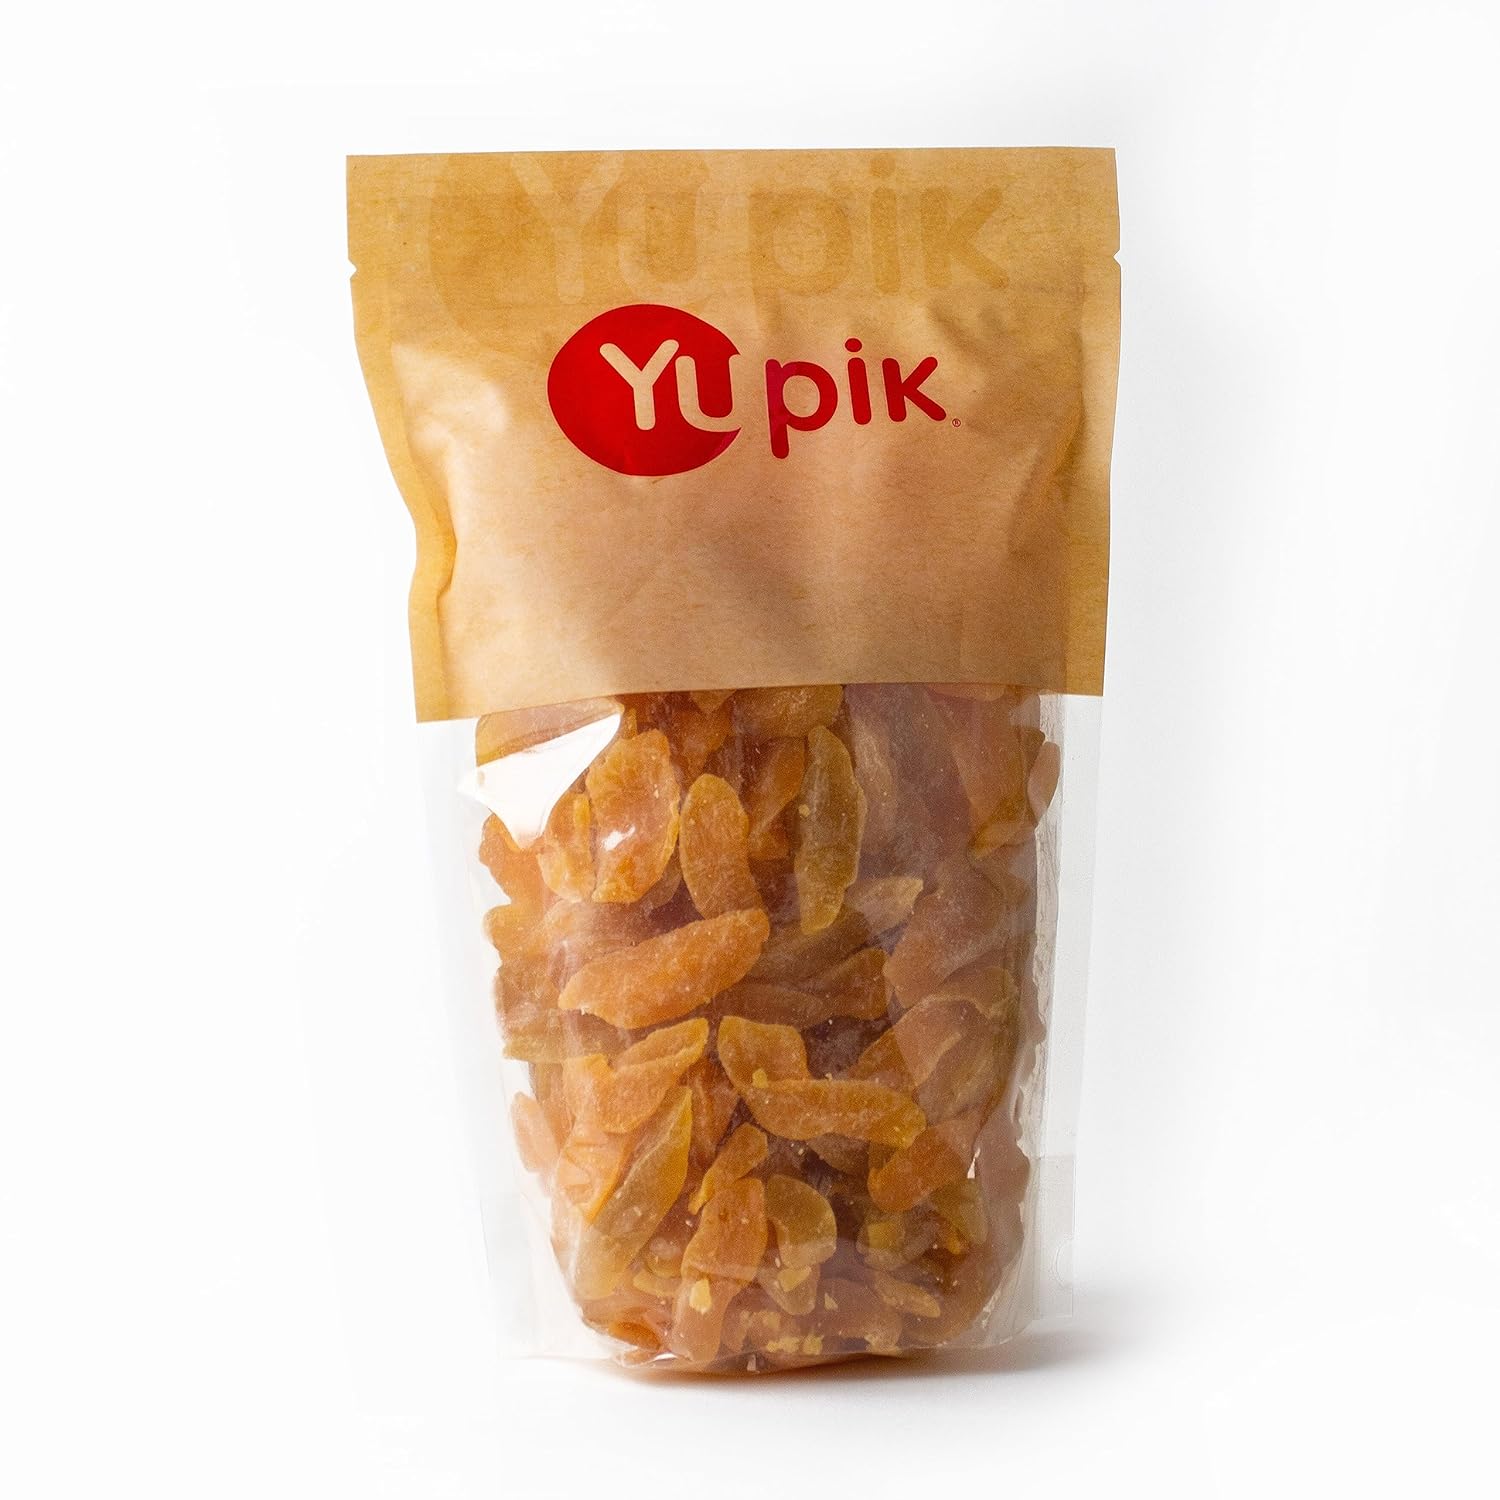 Yupik Dried Infused Fancy Peach Slices, 2.2 lb, Dried Fruit, Snack On the Go, Chewy & Sweet